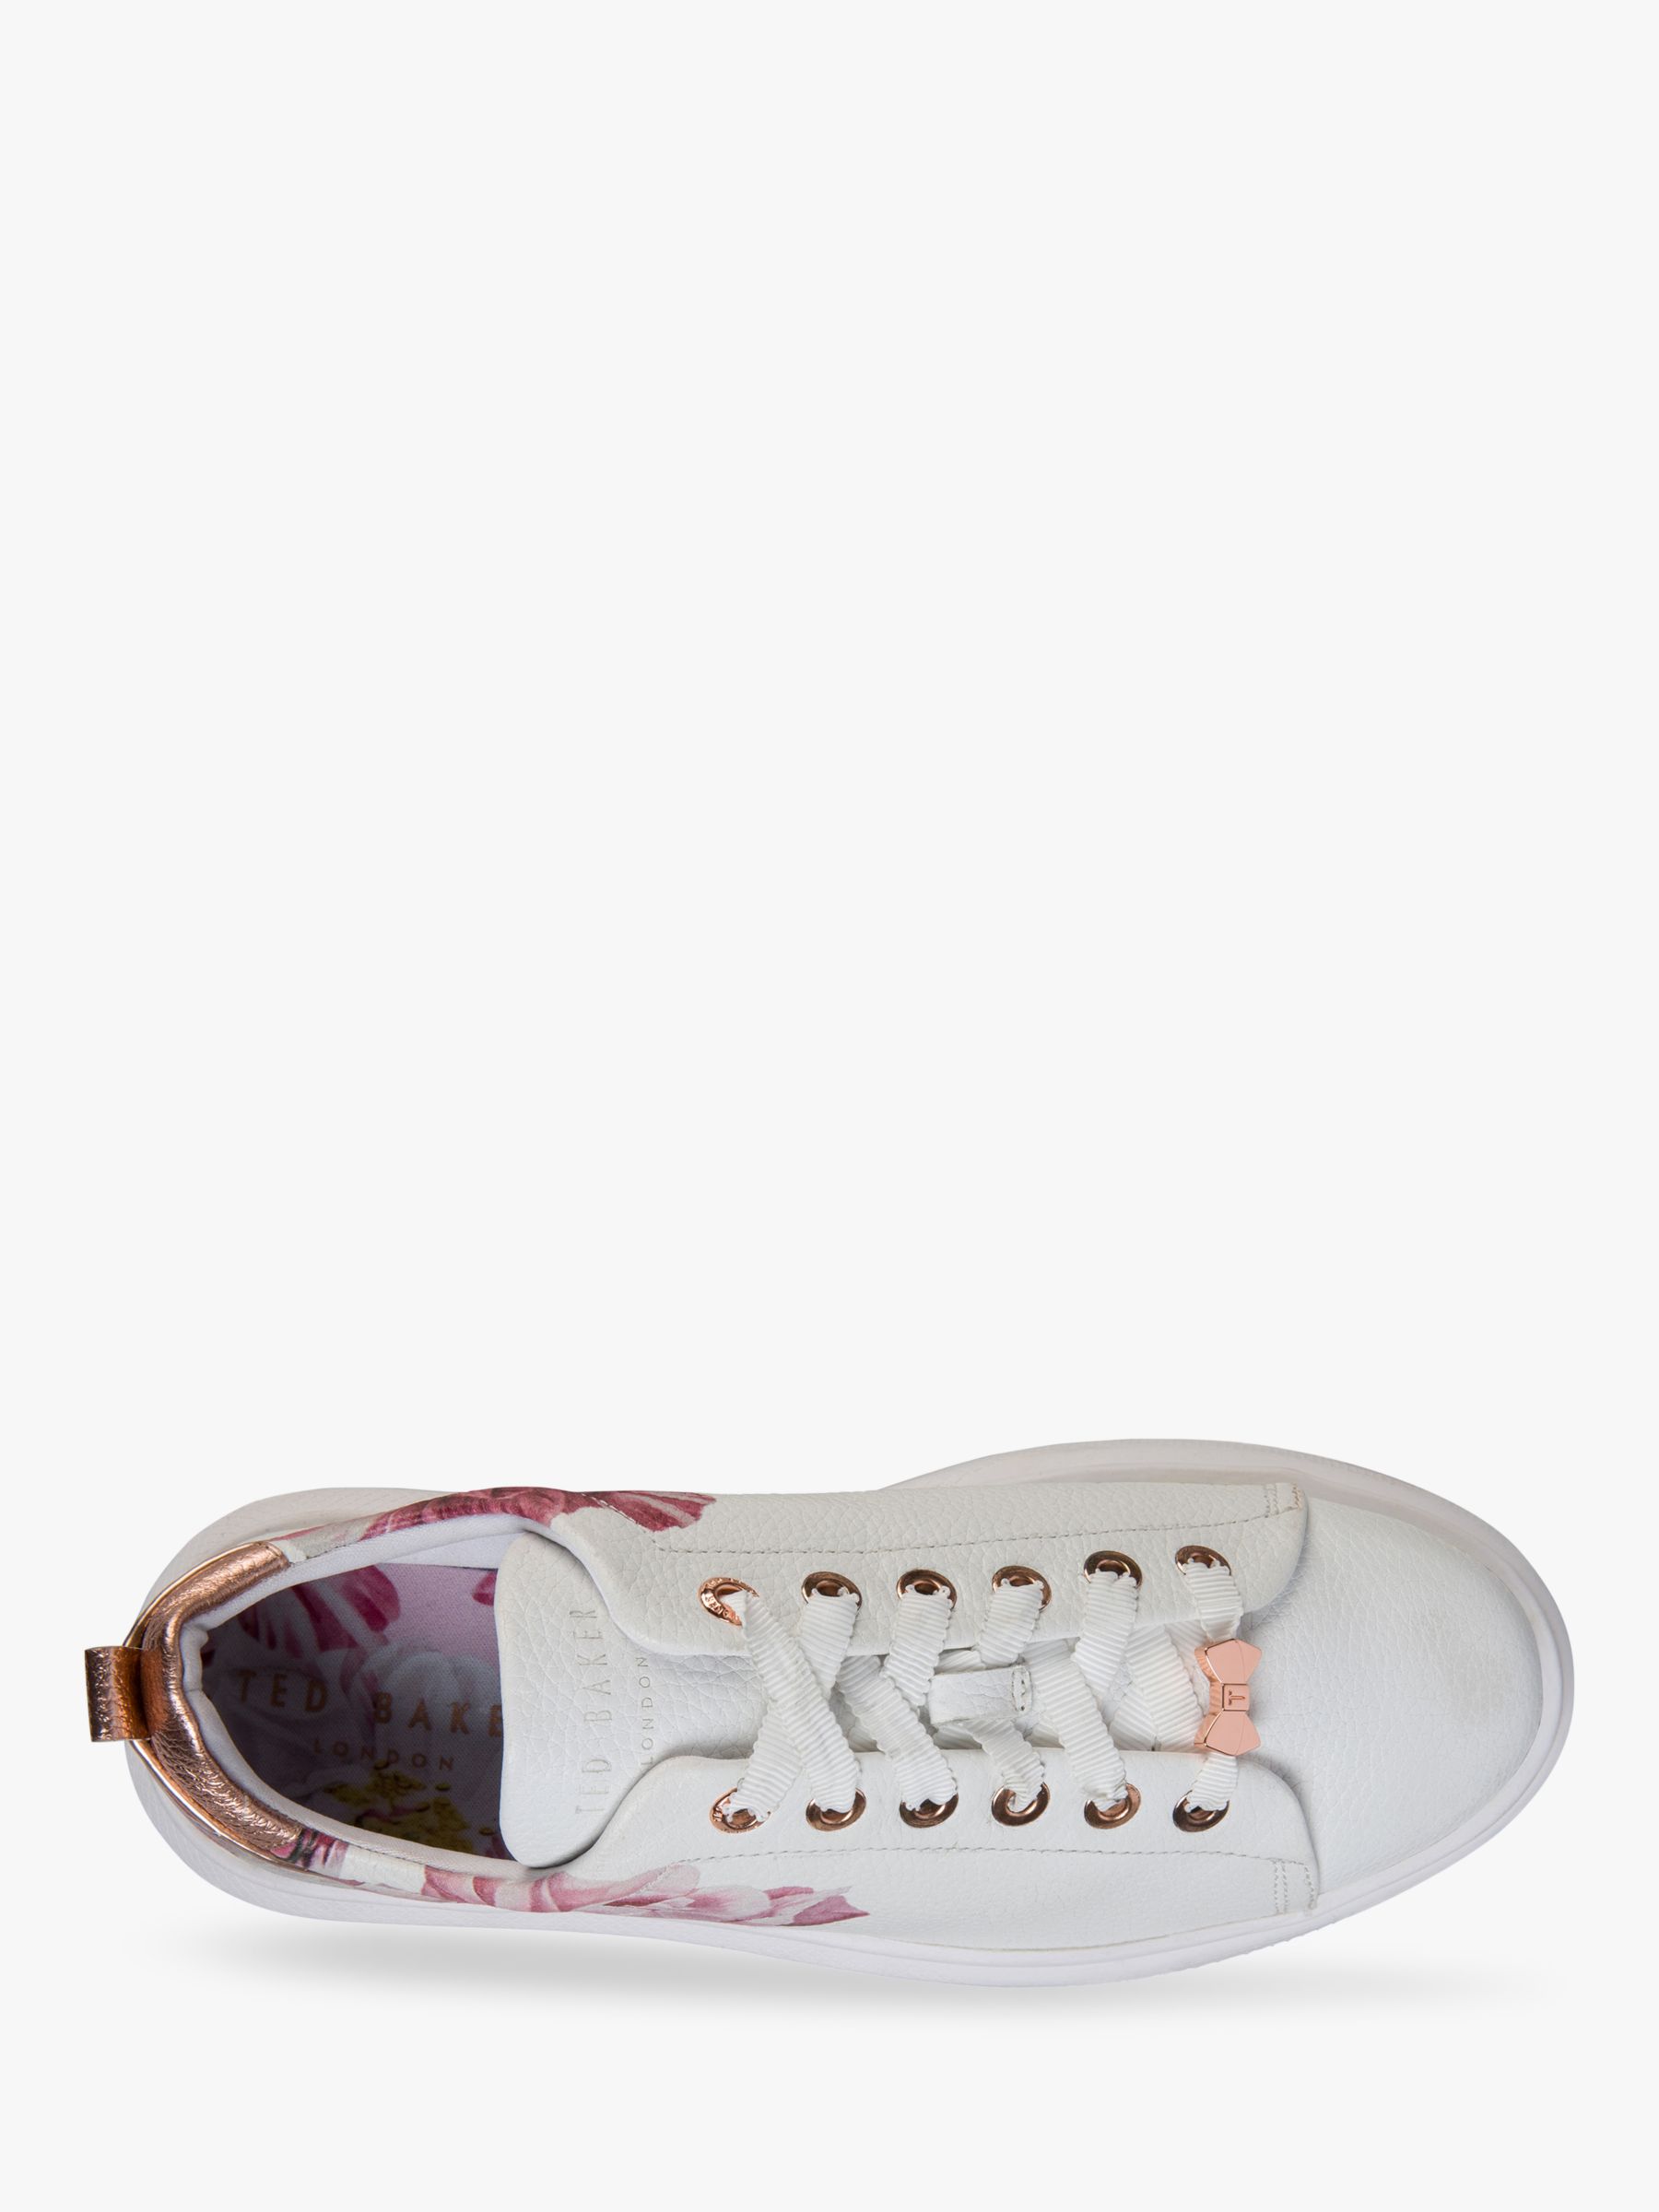 ted baker ailbe 2 sneaker white iguazu leather